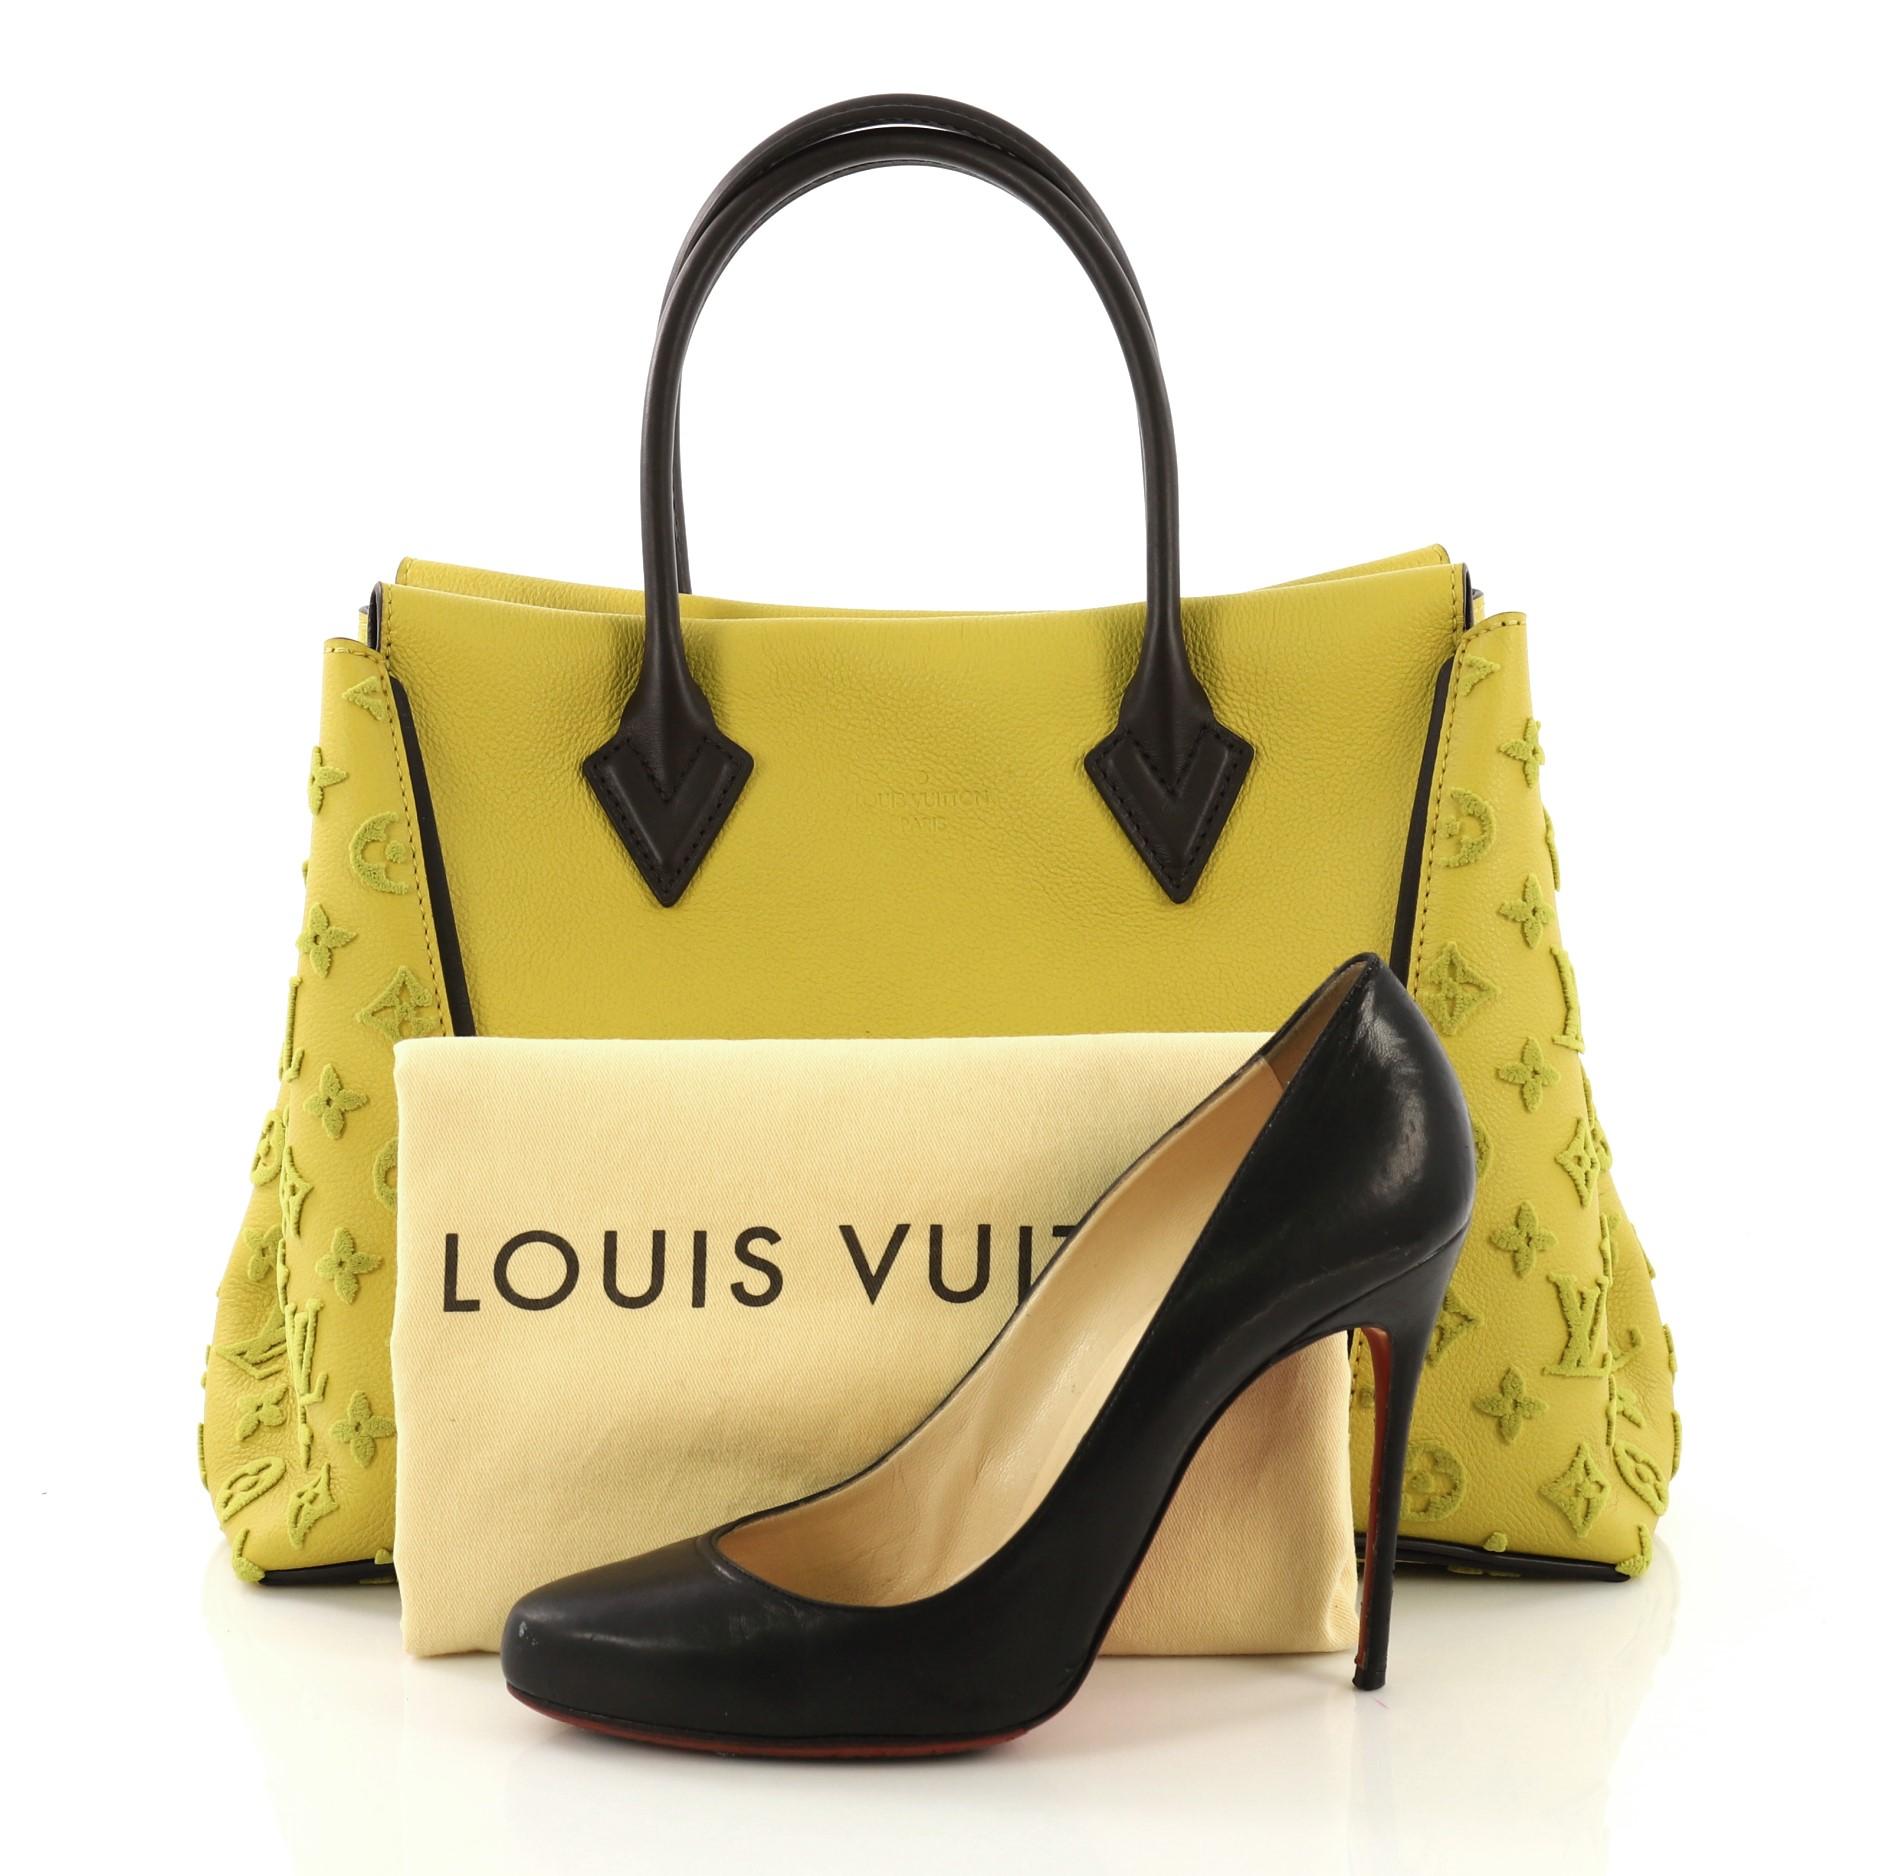 This Louis Vuitton W Tote Veau Cachemire Calfskin PM, crafted from yellow veau cachemire calfskin, features dual rolled handles, expansive sides with tufted monogram embossed patterns and silver-tone hardware. Its magnetic top closure opens to a